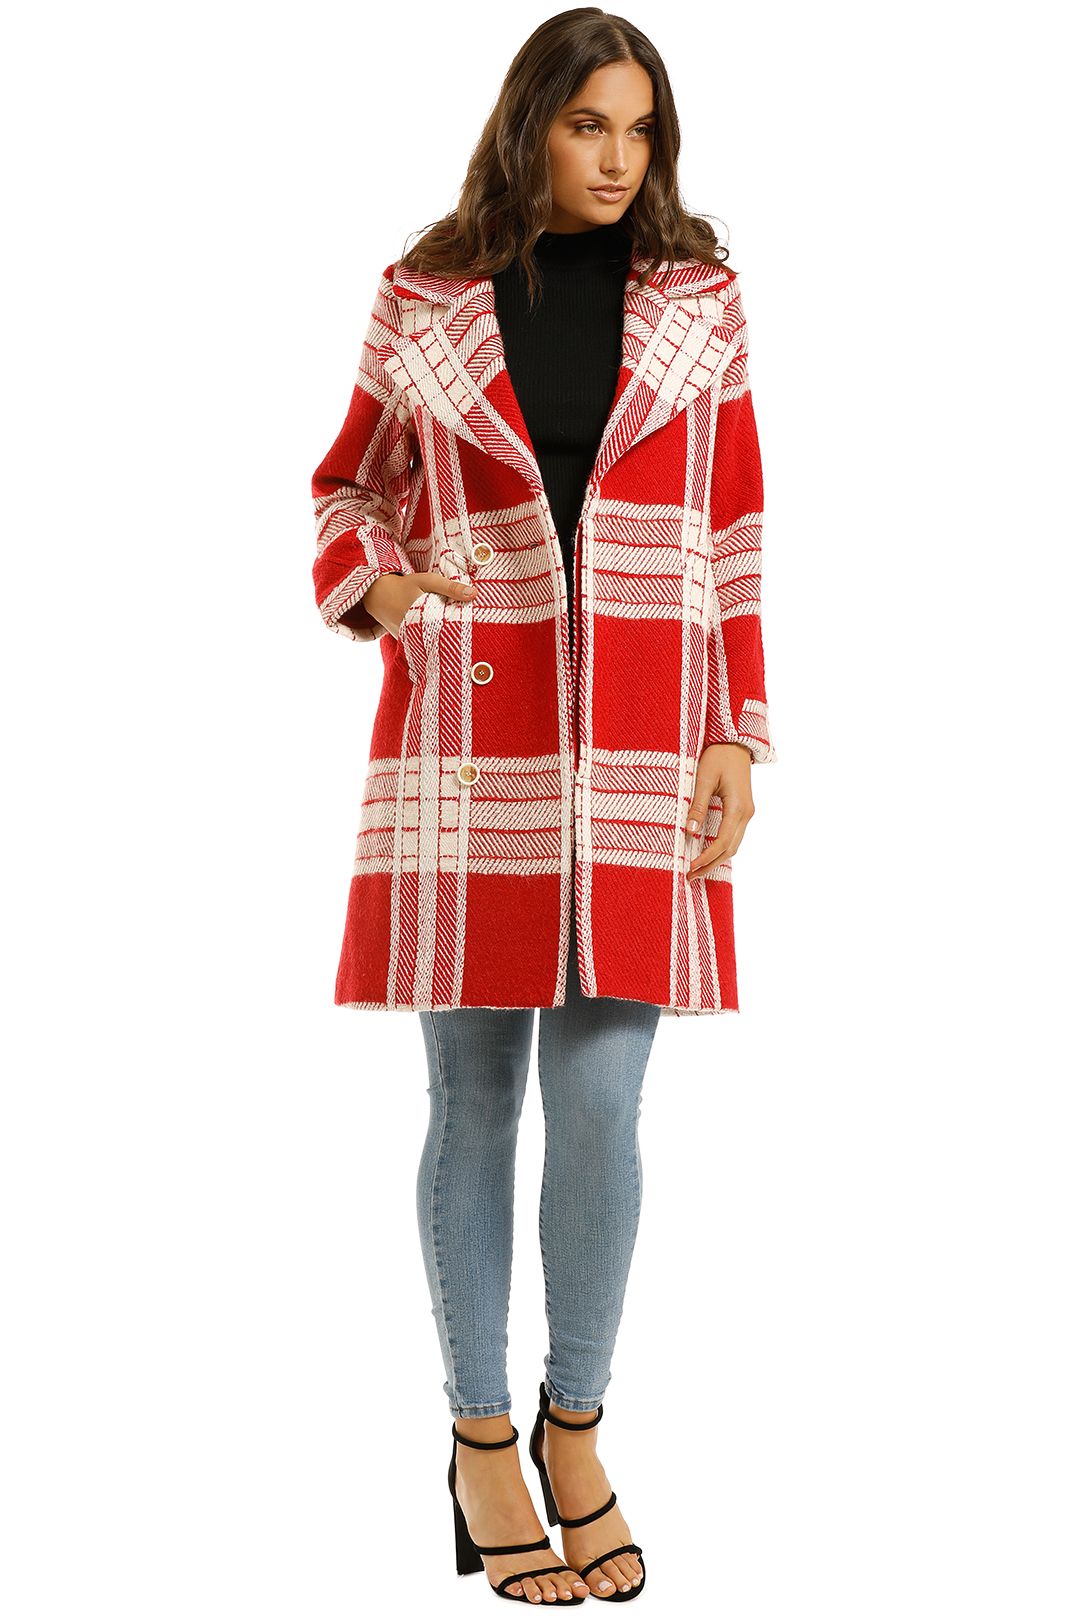 Coop-by-Trelise-Cooper-Rock-The-Coat-Red-Plaid-Side